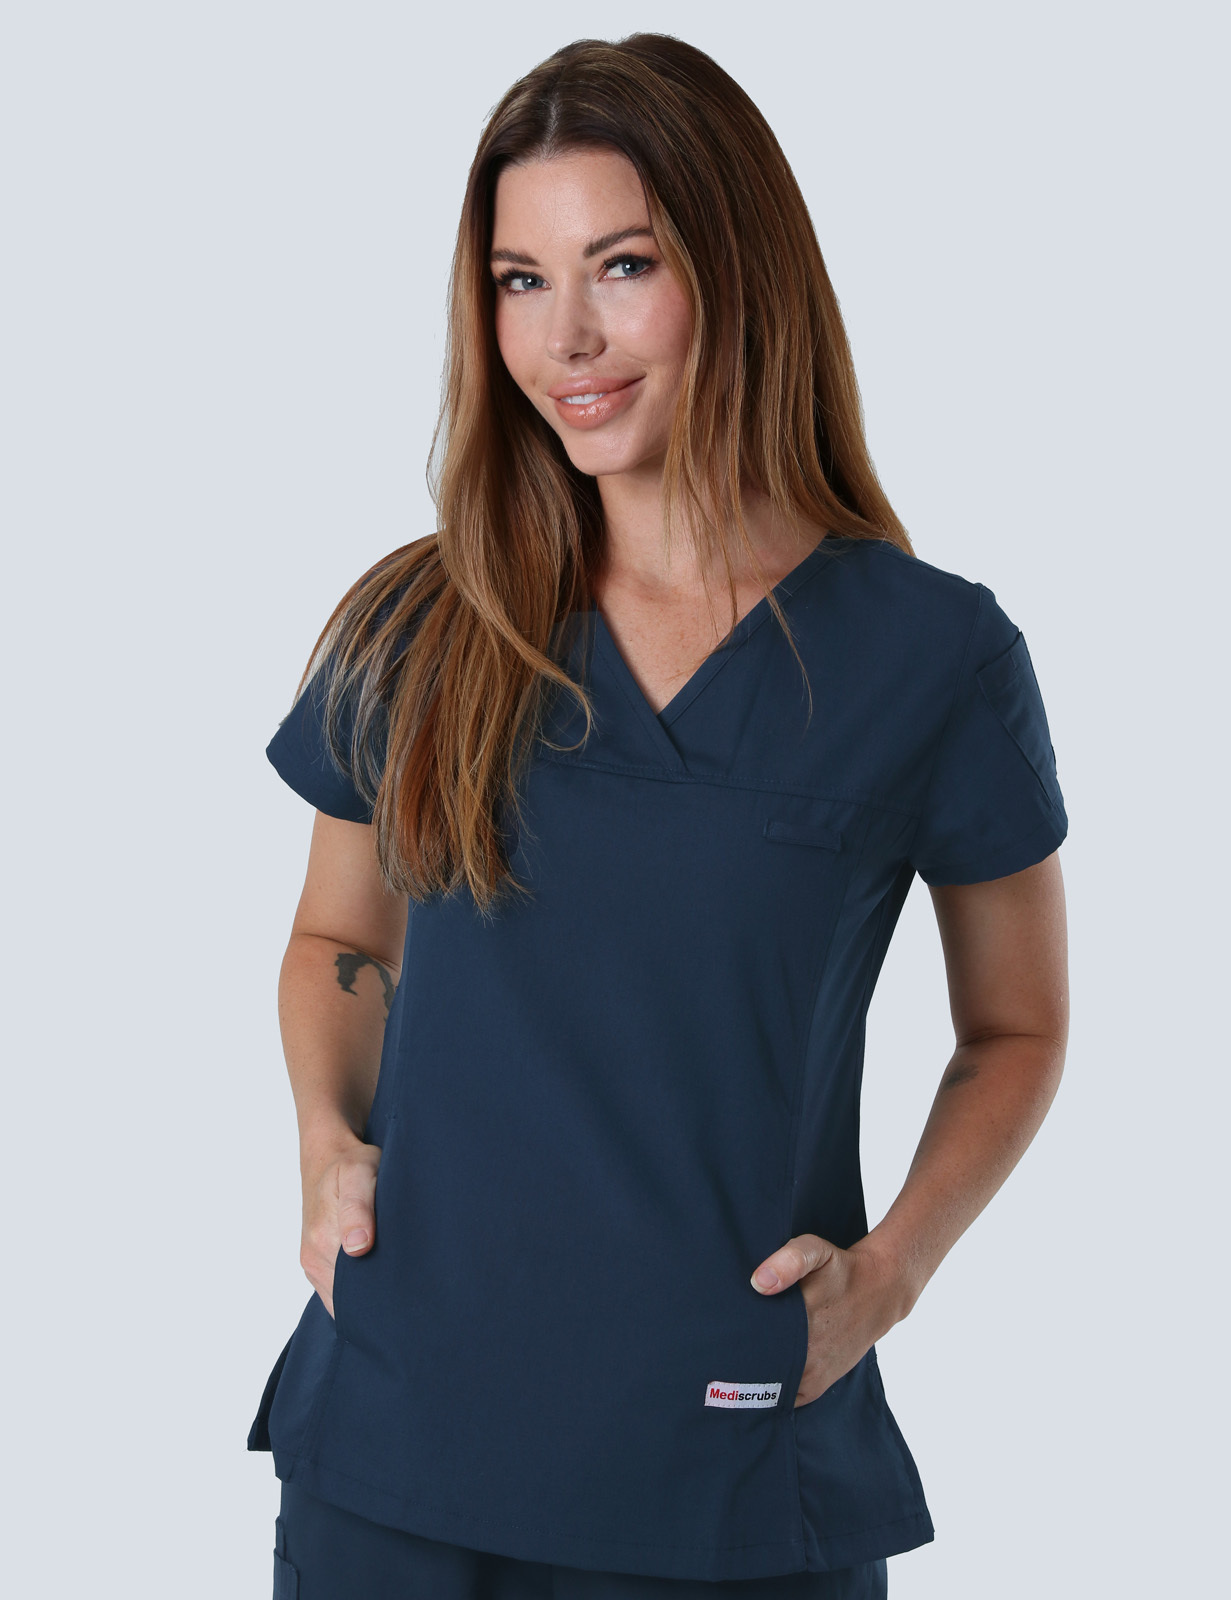 Inglewood MPHS - CN (Women's Fit Solid Scrub Top and Cargo Pants in Navy incl Logos)